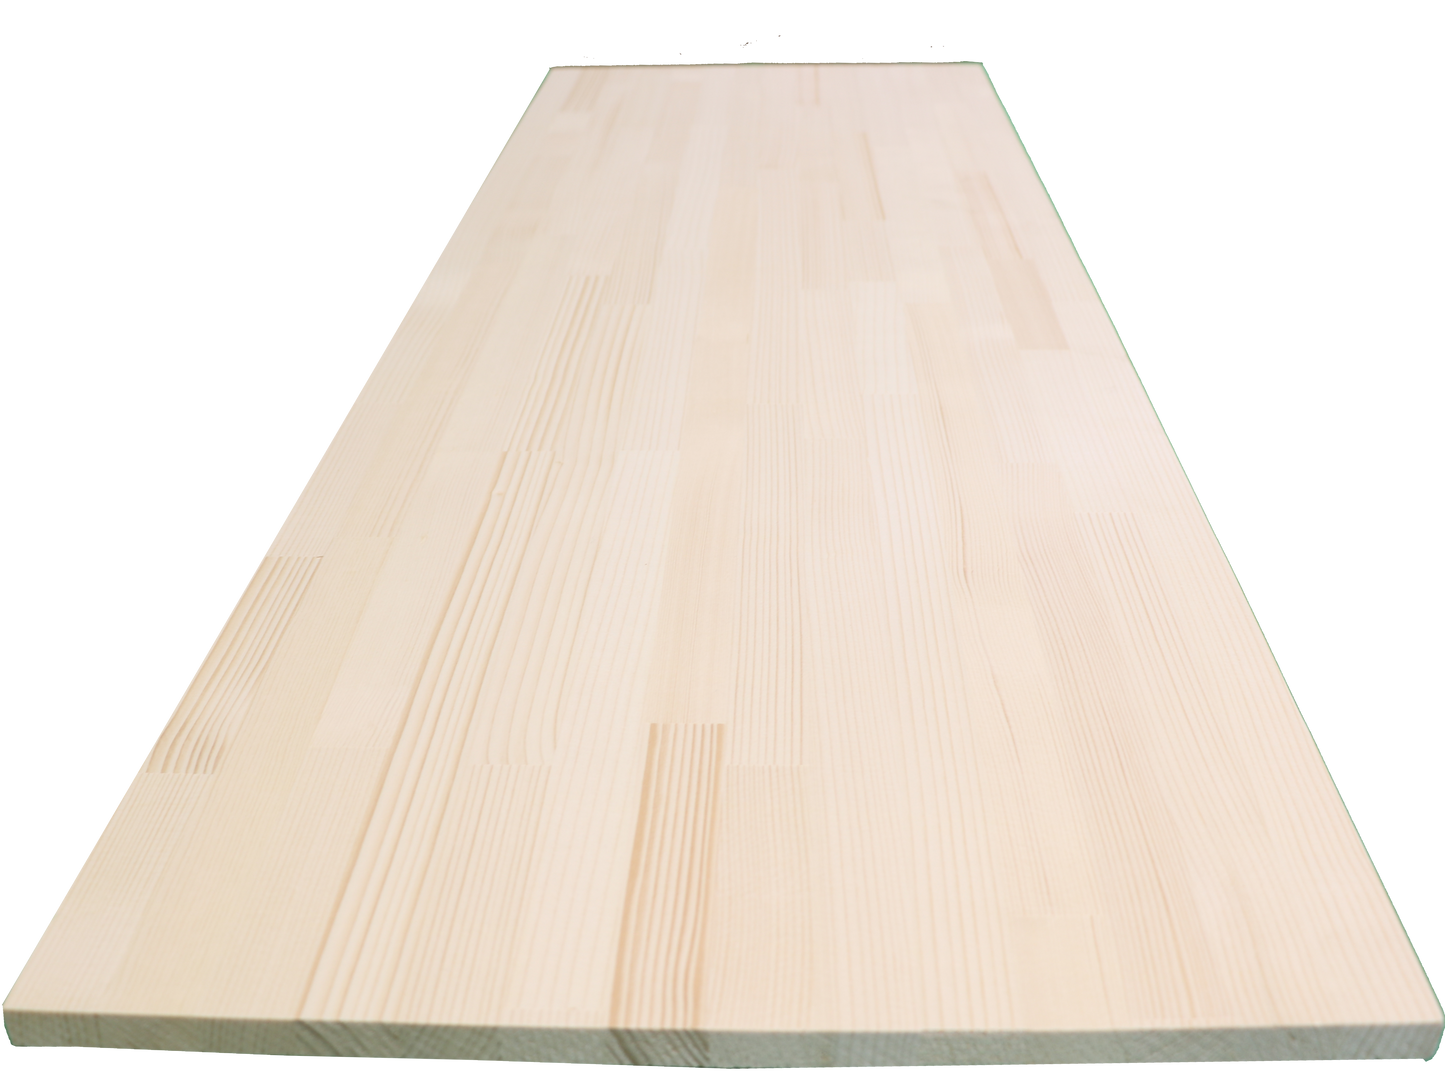 Ele-Joint Natural Wood - White Spruce AA Unfinished - 3/4" x 16" x 8'